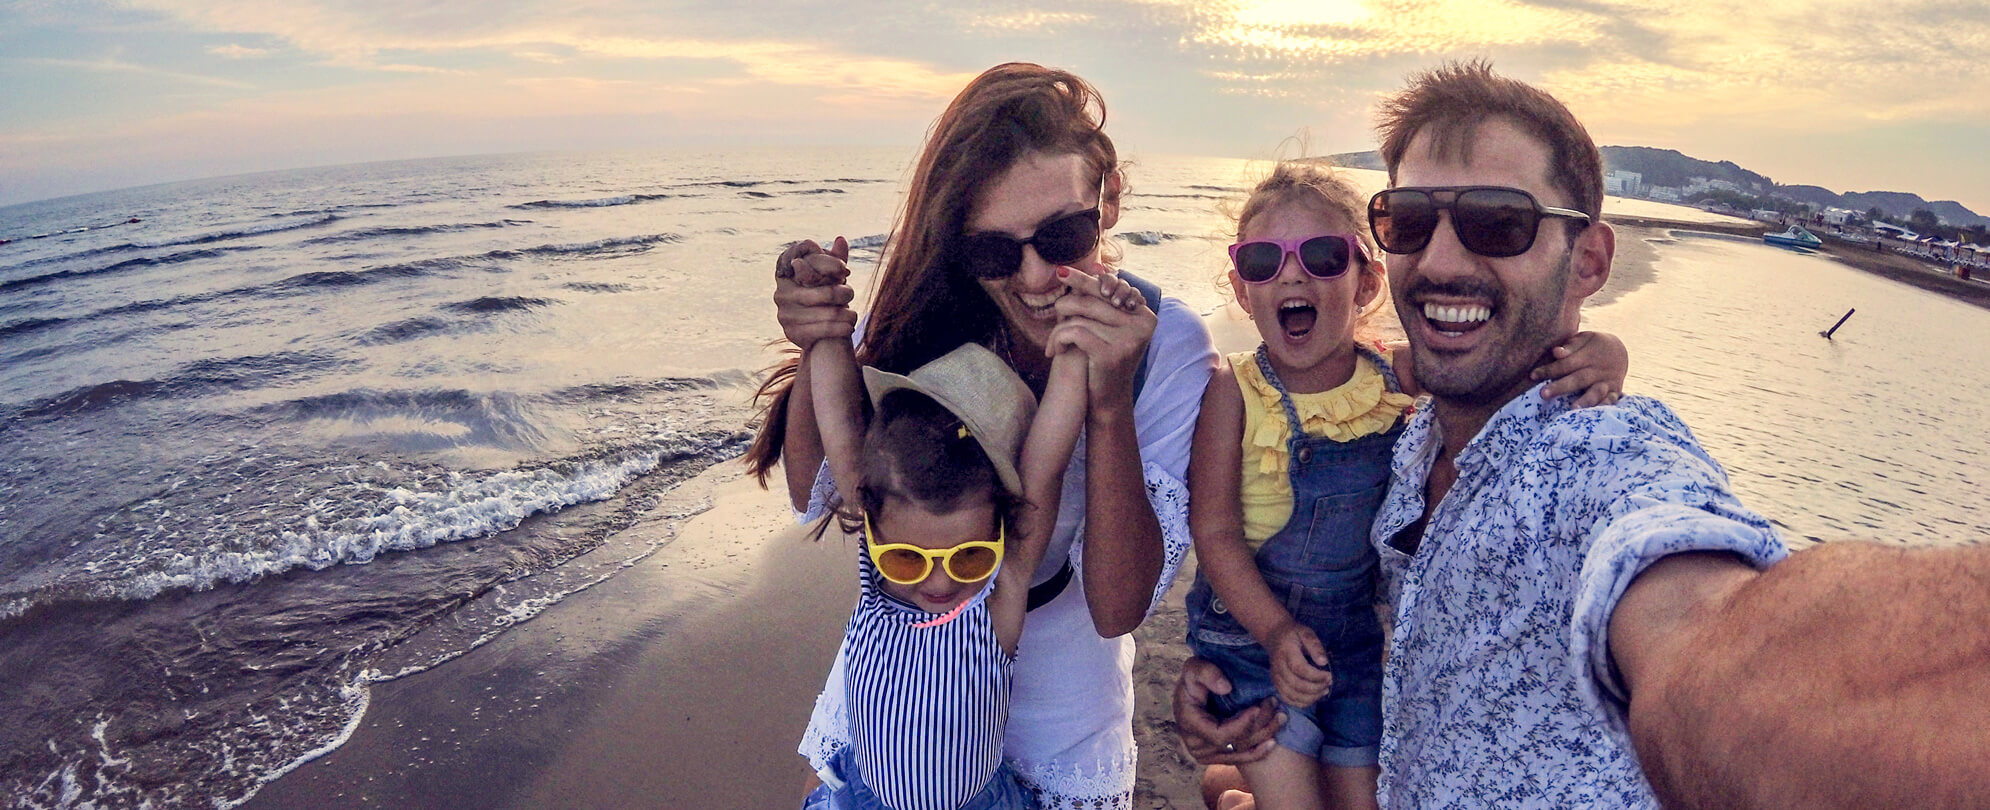 Mother and children wearing sunglasses taking a fun family photo together 